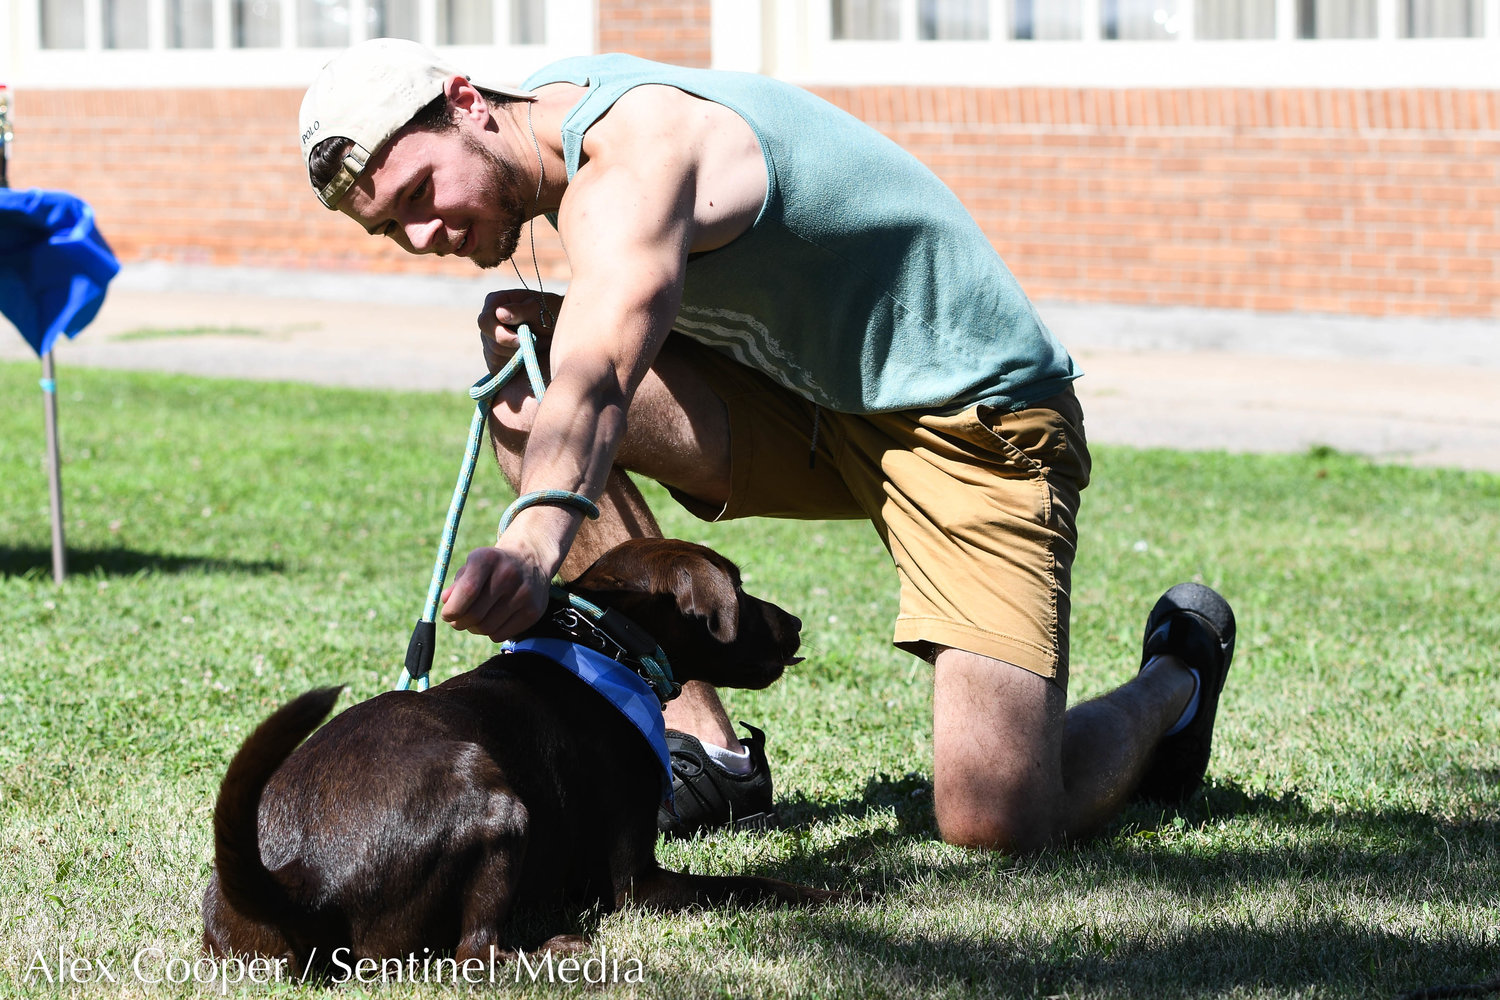 Austin Green helps his chocolate lab Amaretto do a trick during a dog show hosted by the Herkimer County Humane Society on Saturday at Central Plaza in Ilion. The show was part of a long list of events hosted during Ilion Days 2022 from July 16-24.